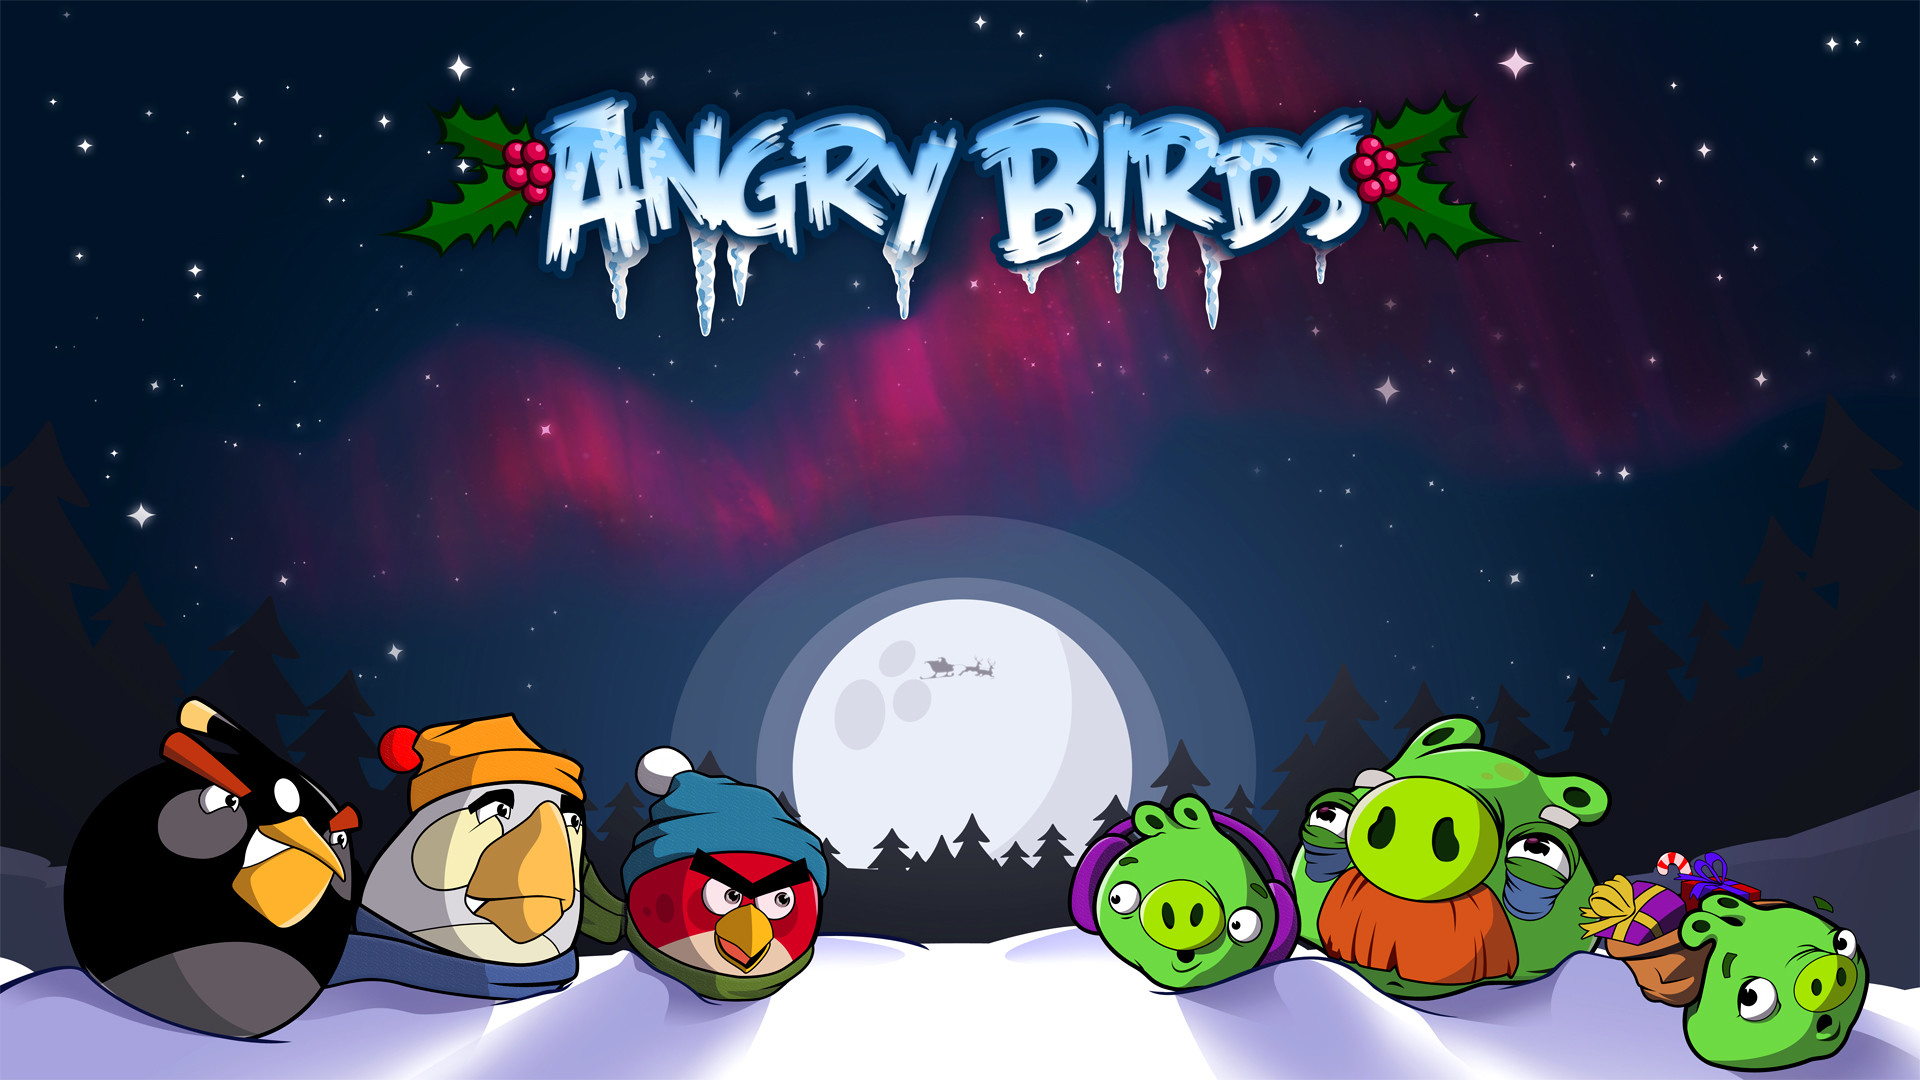 1920x1080 Download The Latest angry birds christmas Wallpapers & Pictures From  Wallpapers111.